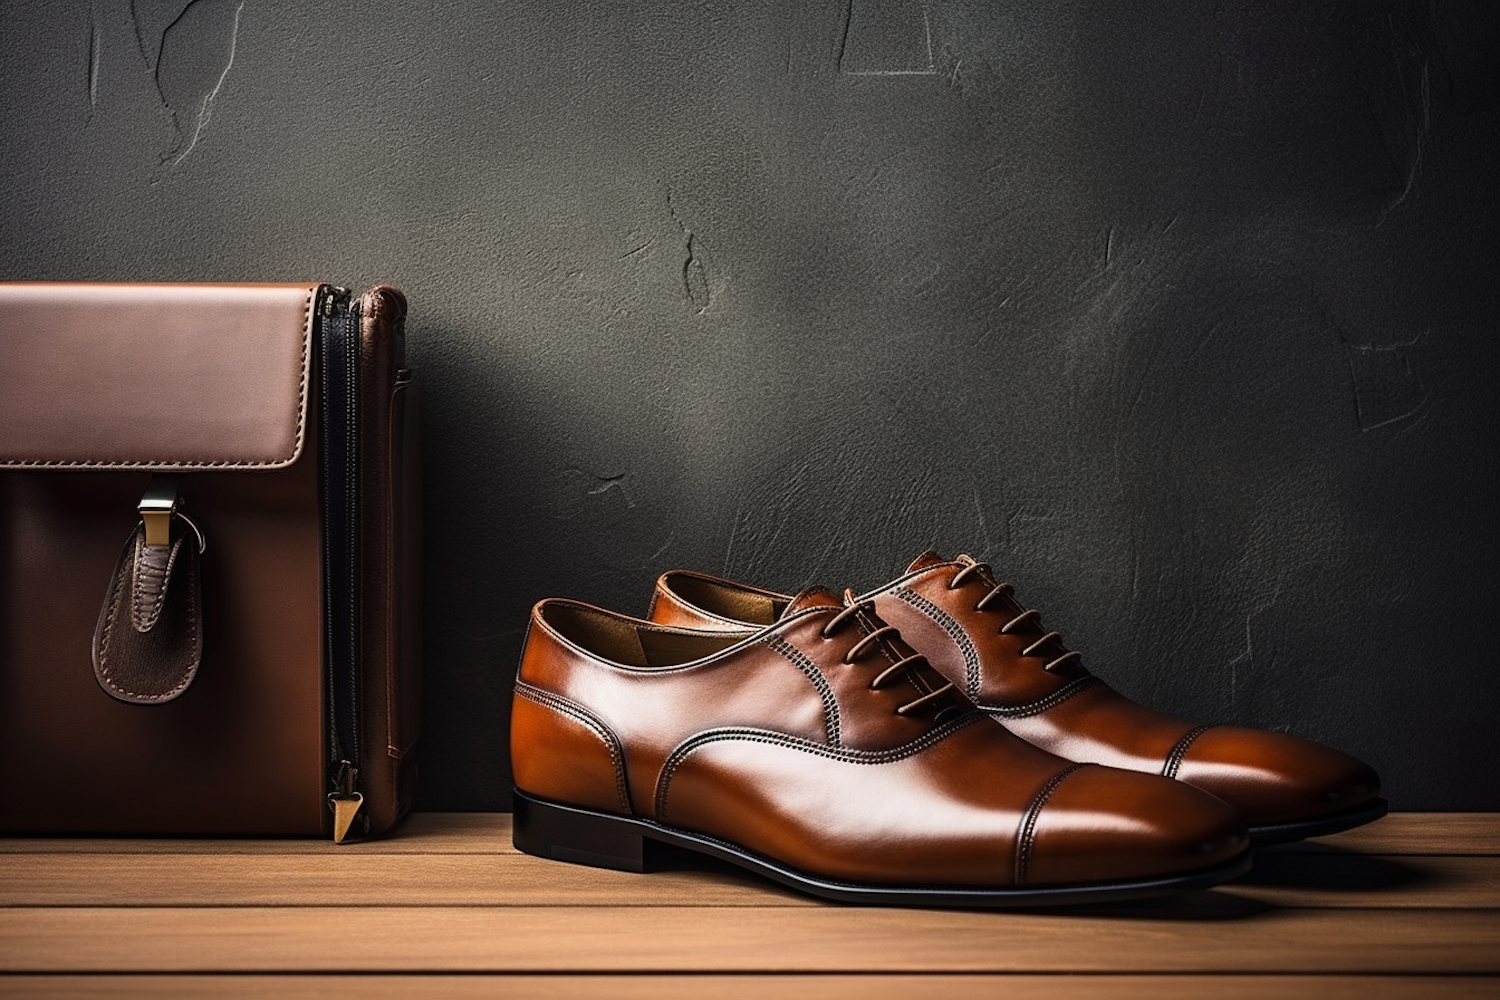 Sophisticated Elegance: Men's Brown Leather Oxford Dress Shoes and Briefcase